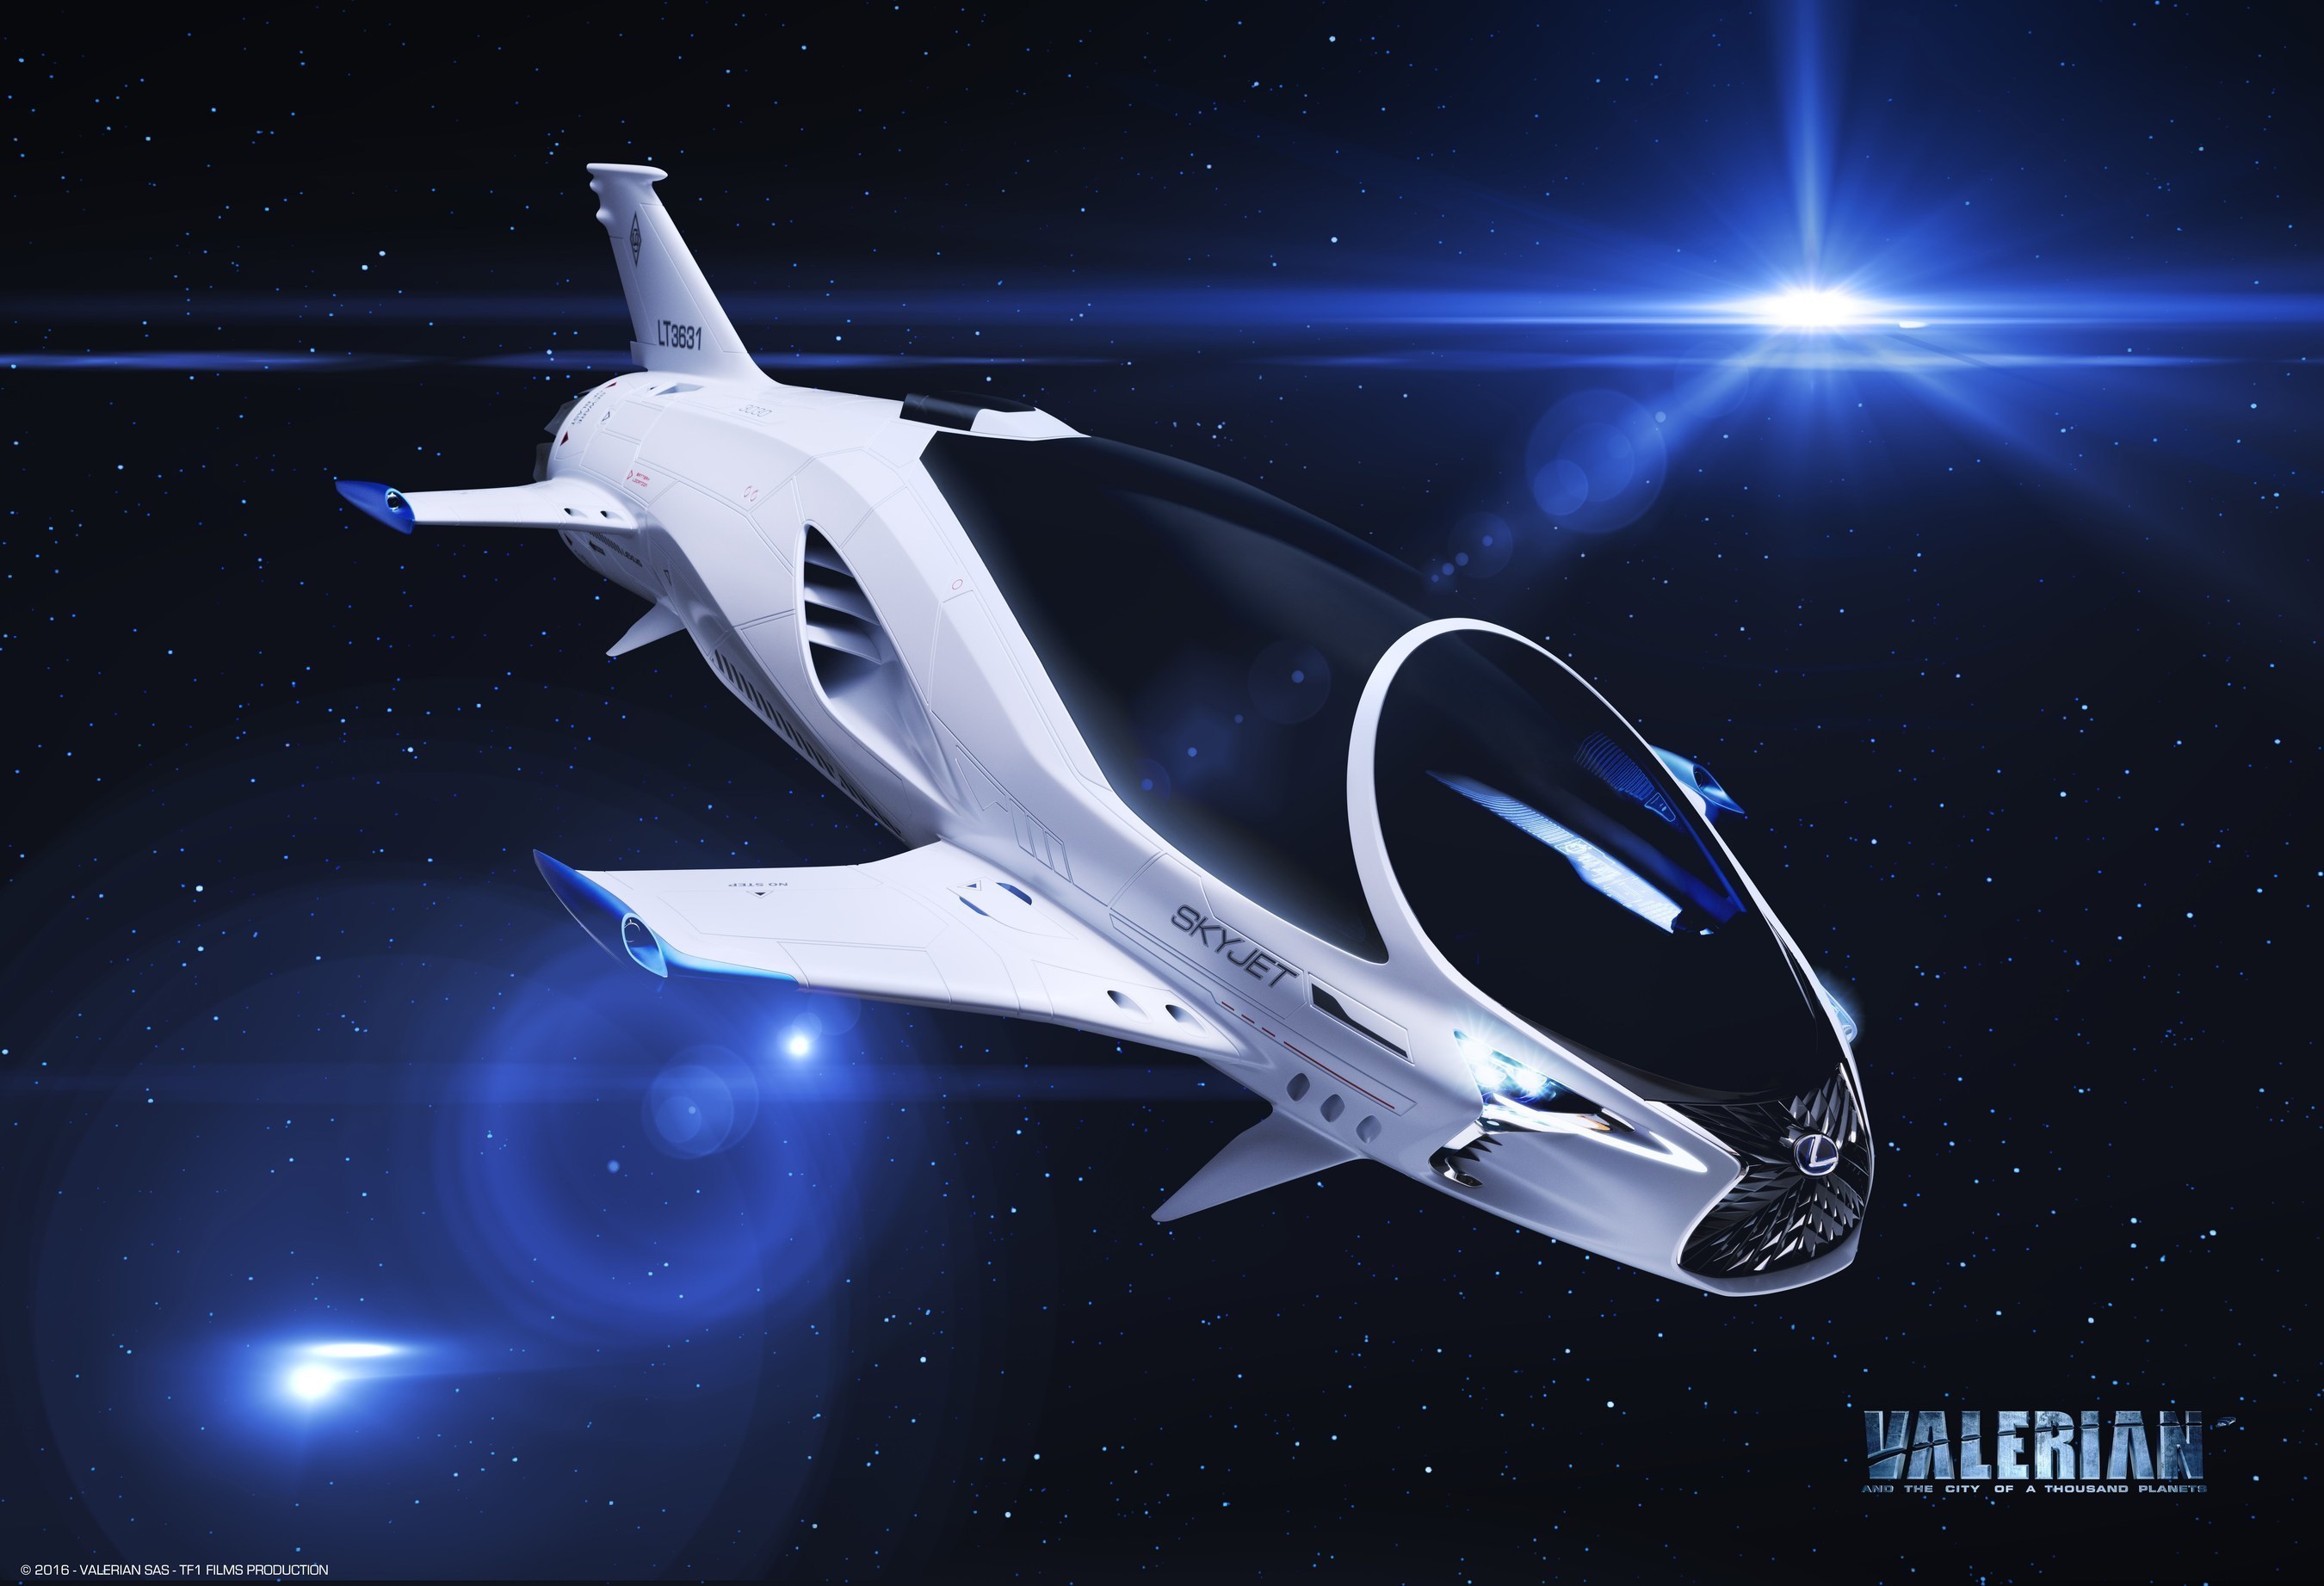 Lexus collaborated with the Valerian creative team, as they imagined and brought to life the vision for the SKYJET, a single-seat pursuit craft featured in the film. See it in the Valerian teaser trailer here: http://valerianmovie.com (PRNewsFoto/Lexus International)